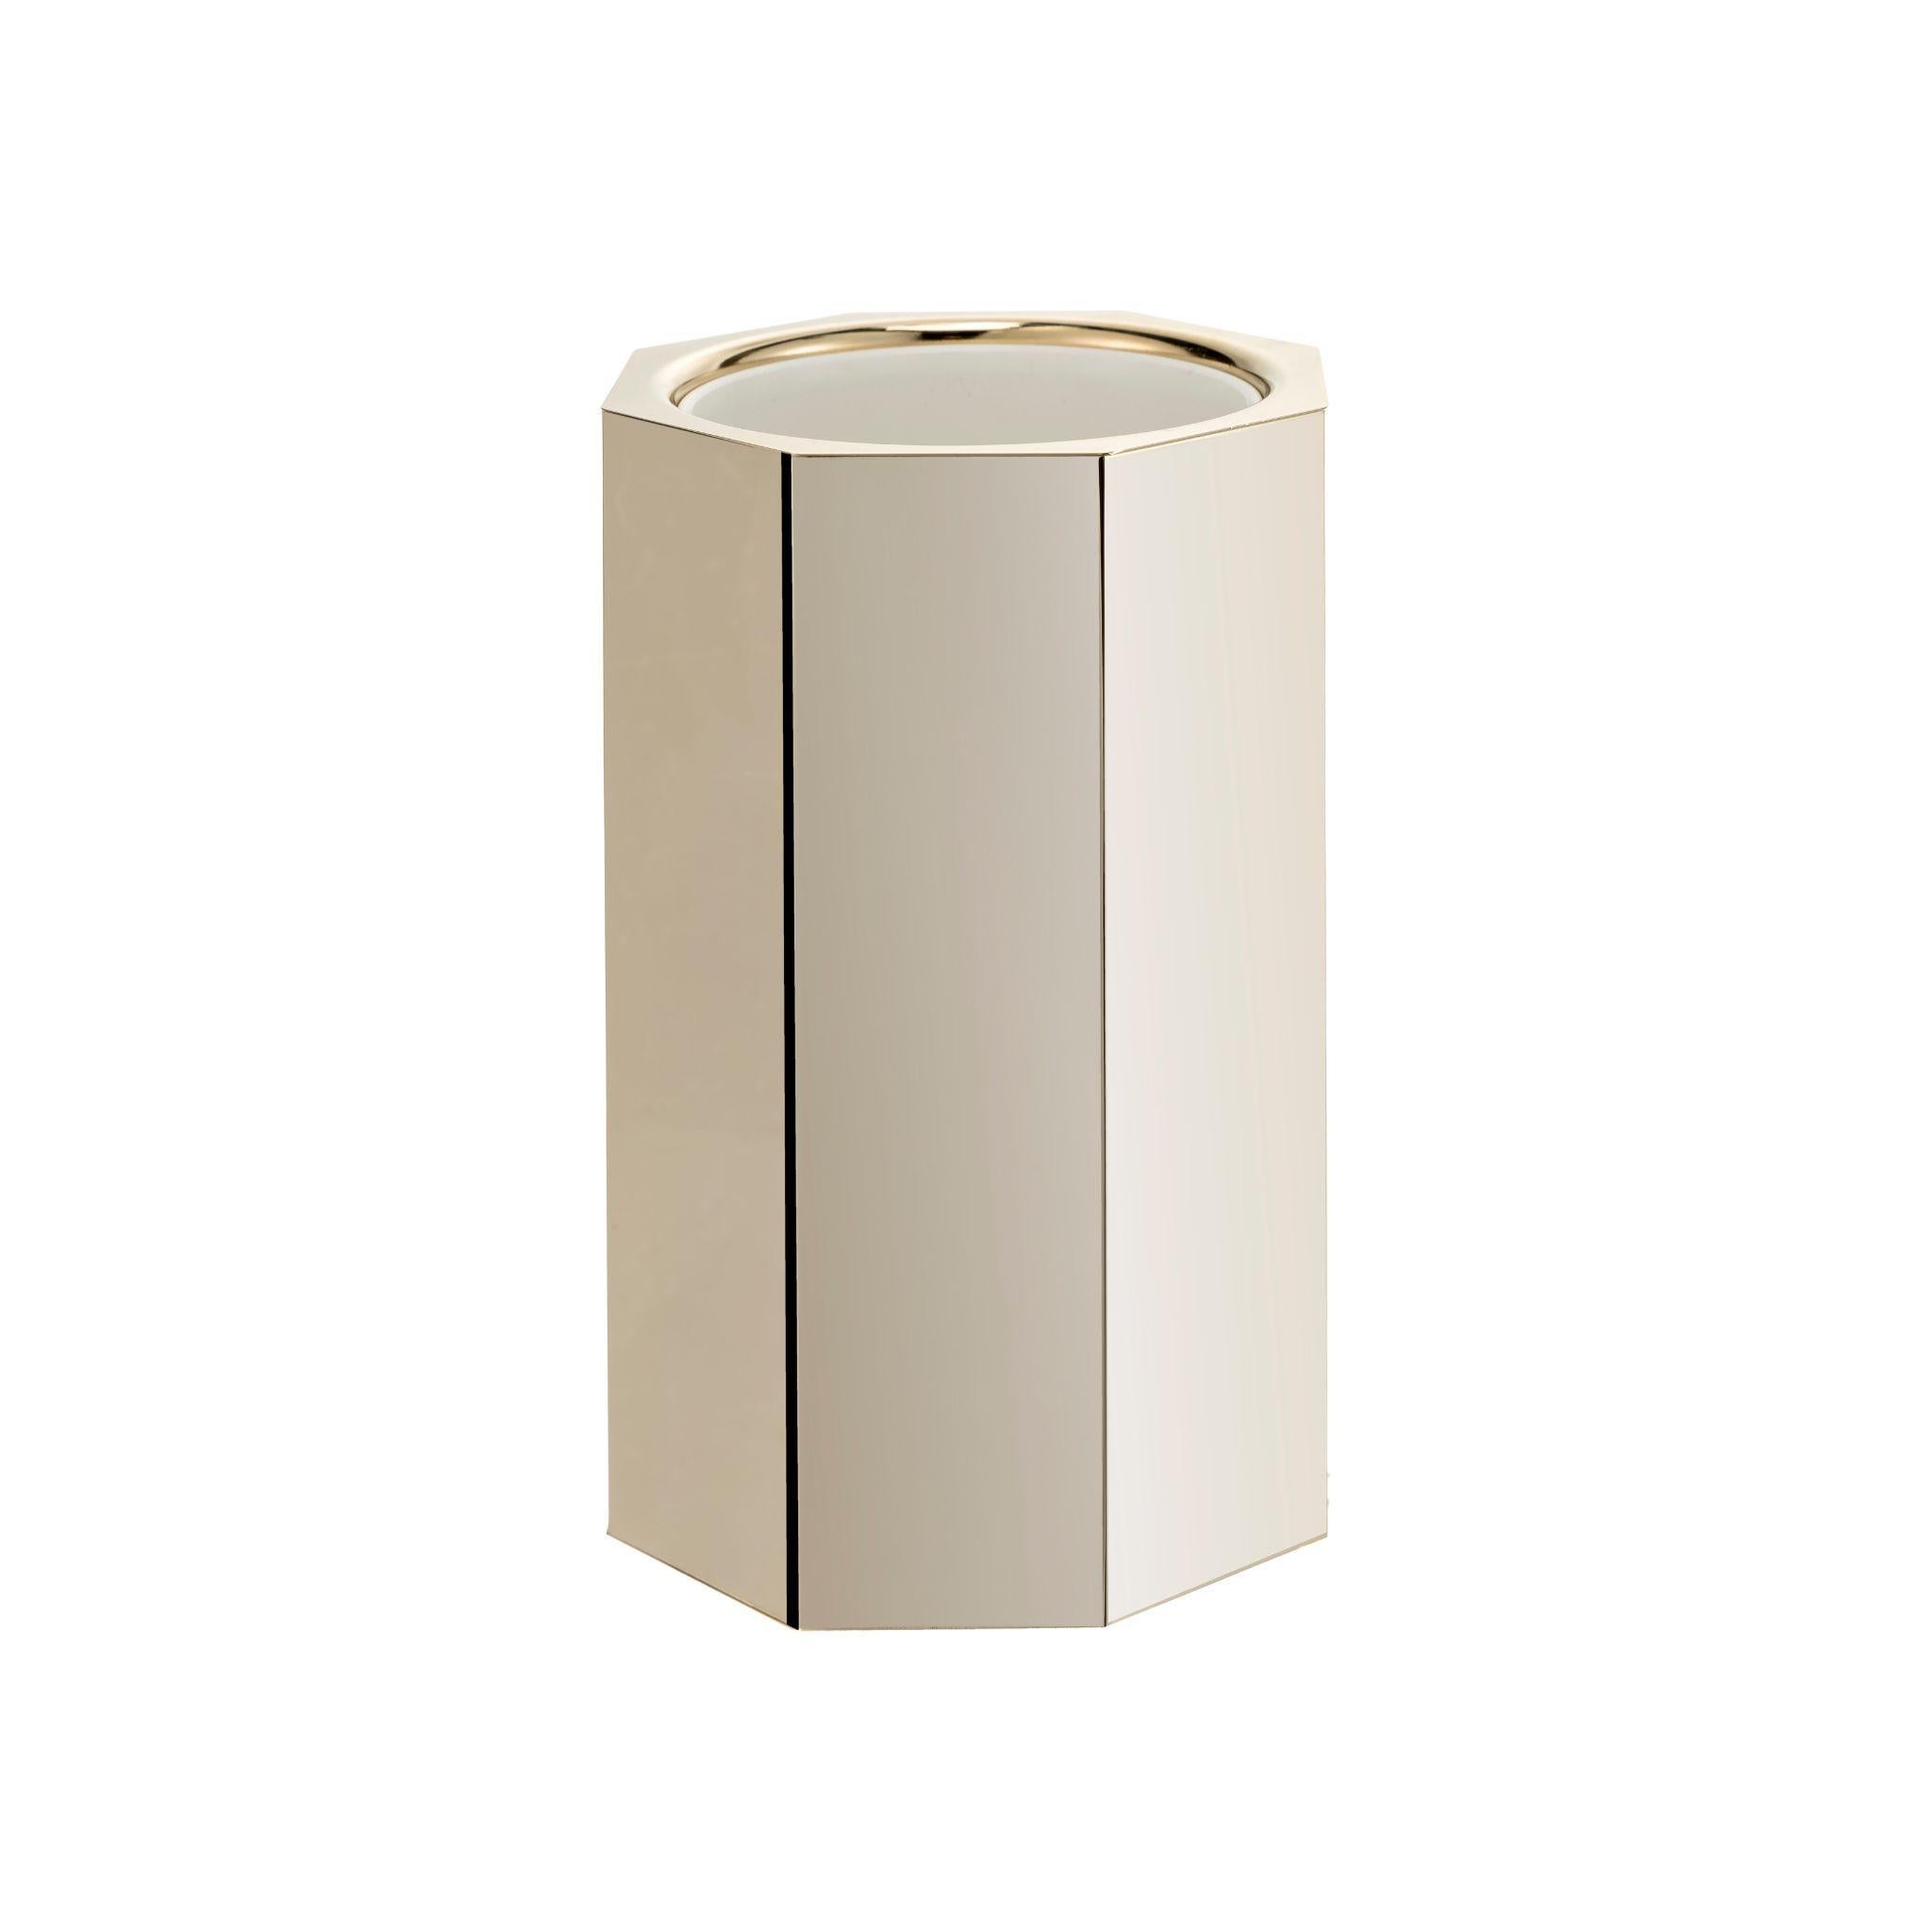 Add a touch of classic elegance to your home decor with our hexagonal brass glacette. Featuring a natural brass finish, its unique and stylish design is perfect for keeping drinks cold and adding sophistication to any space. Ideal for entertaining